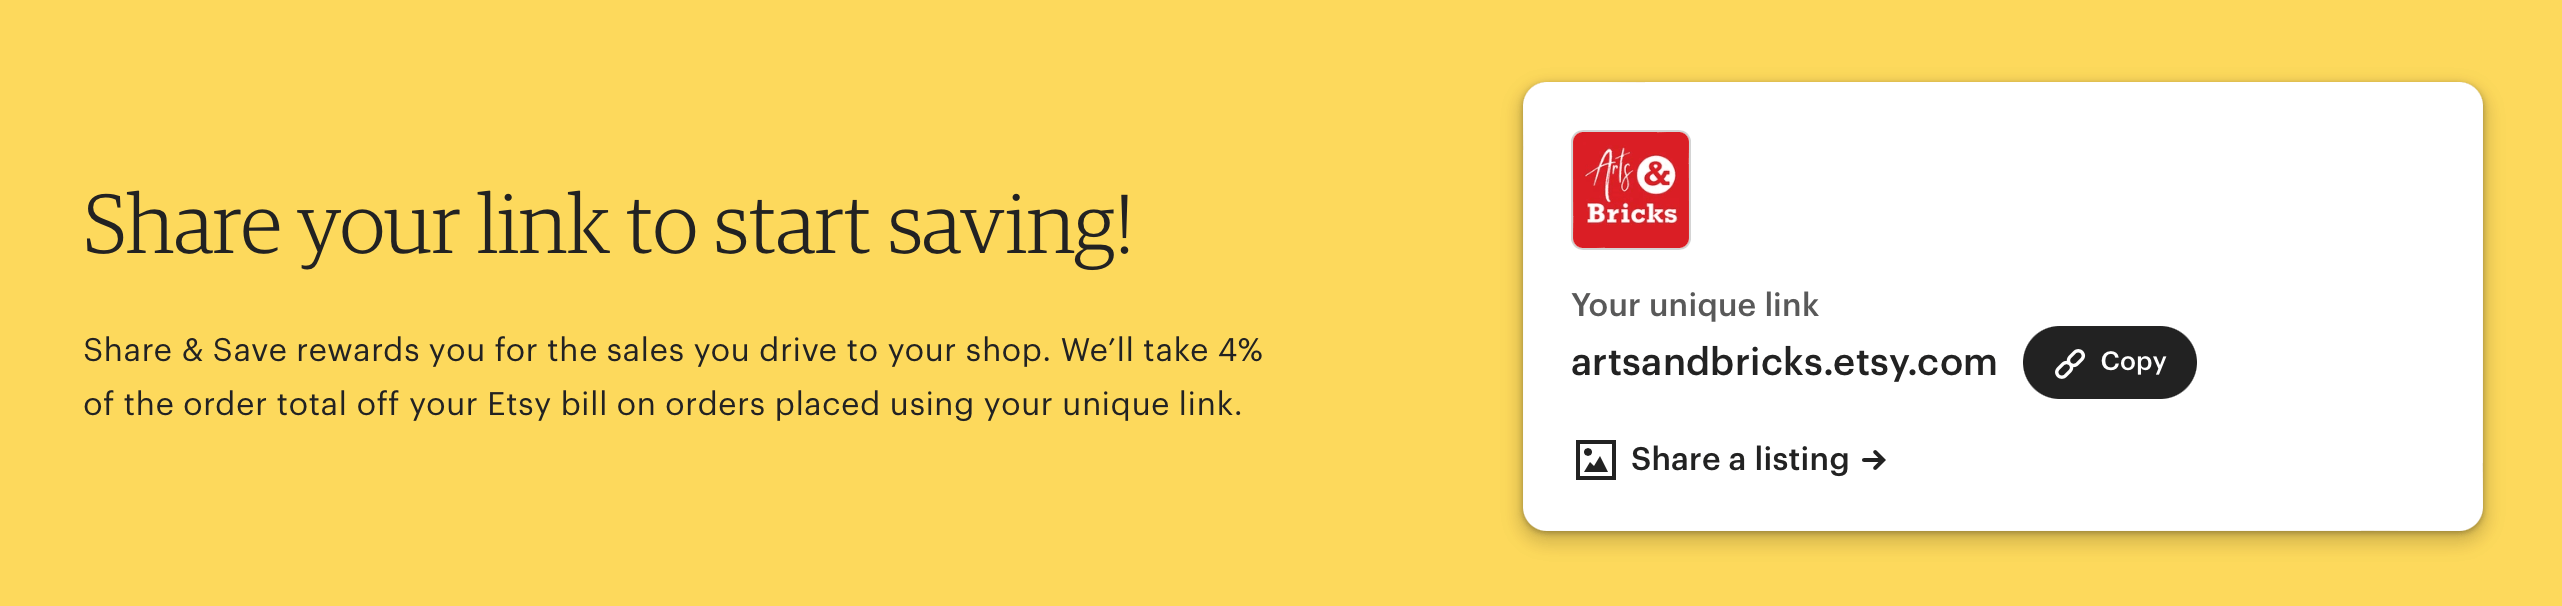 Marketing share links from Etsy use a subdomain to create unique links for tracking sales. Purchase using your unique link save you 4% of the sales total on your Etsy bill.